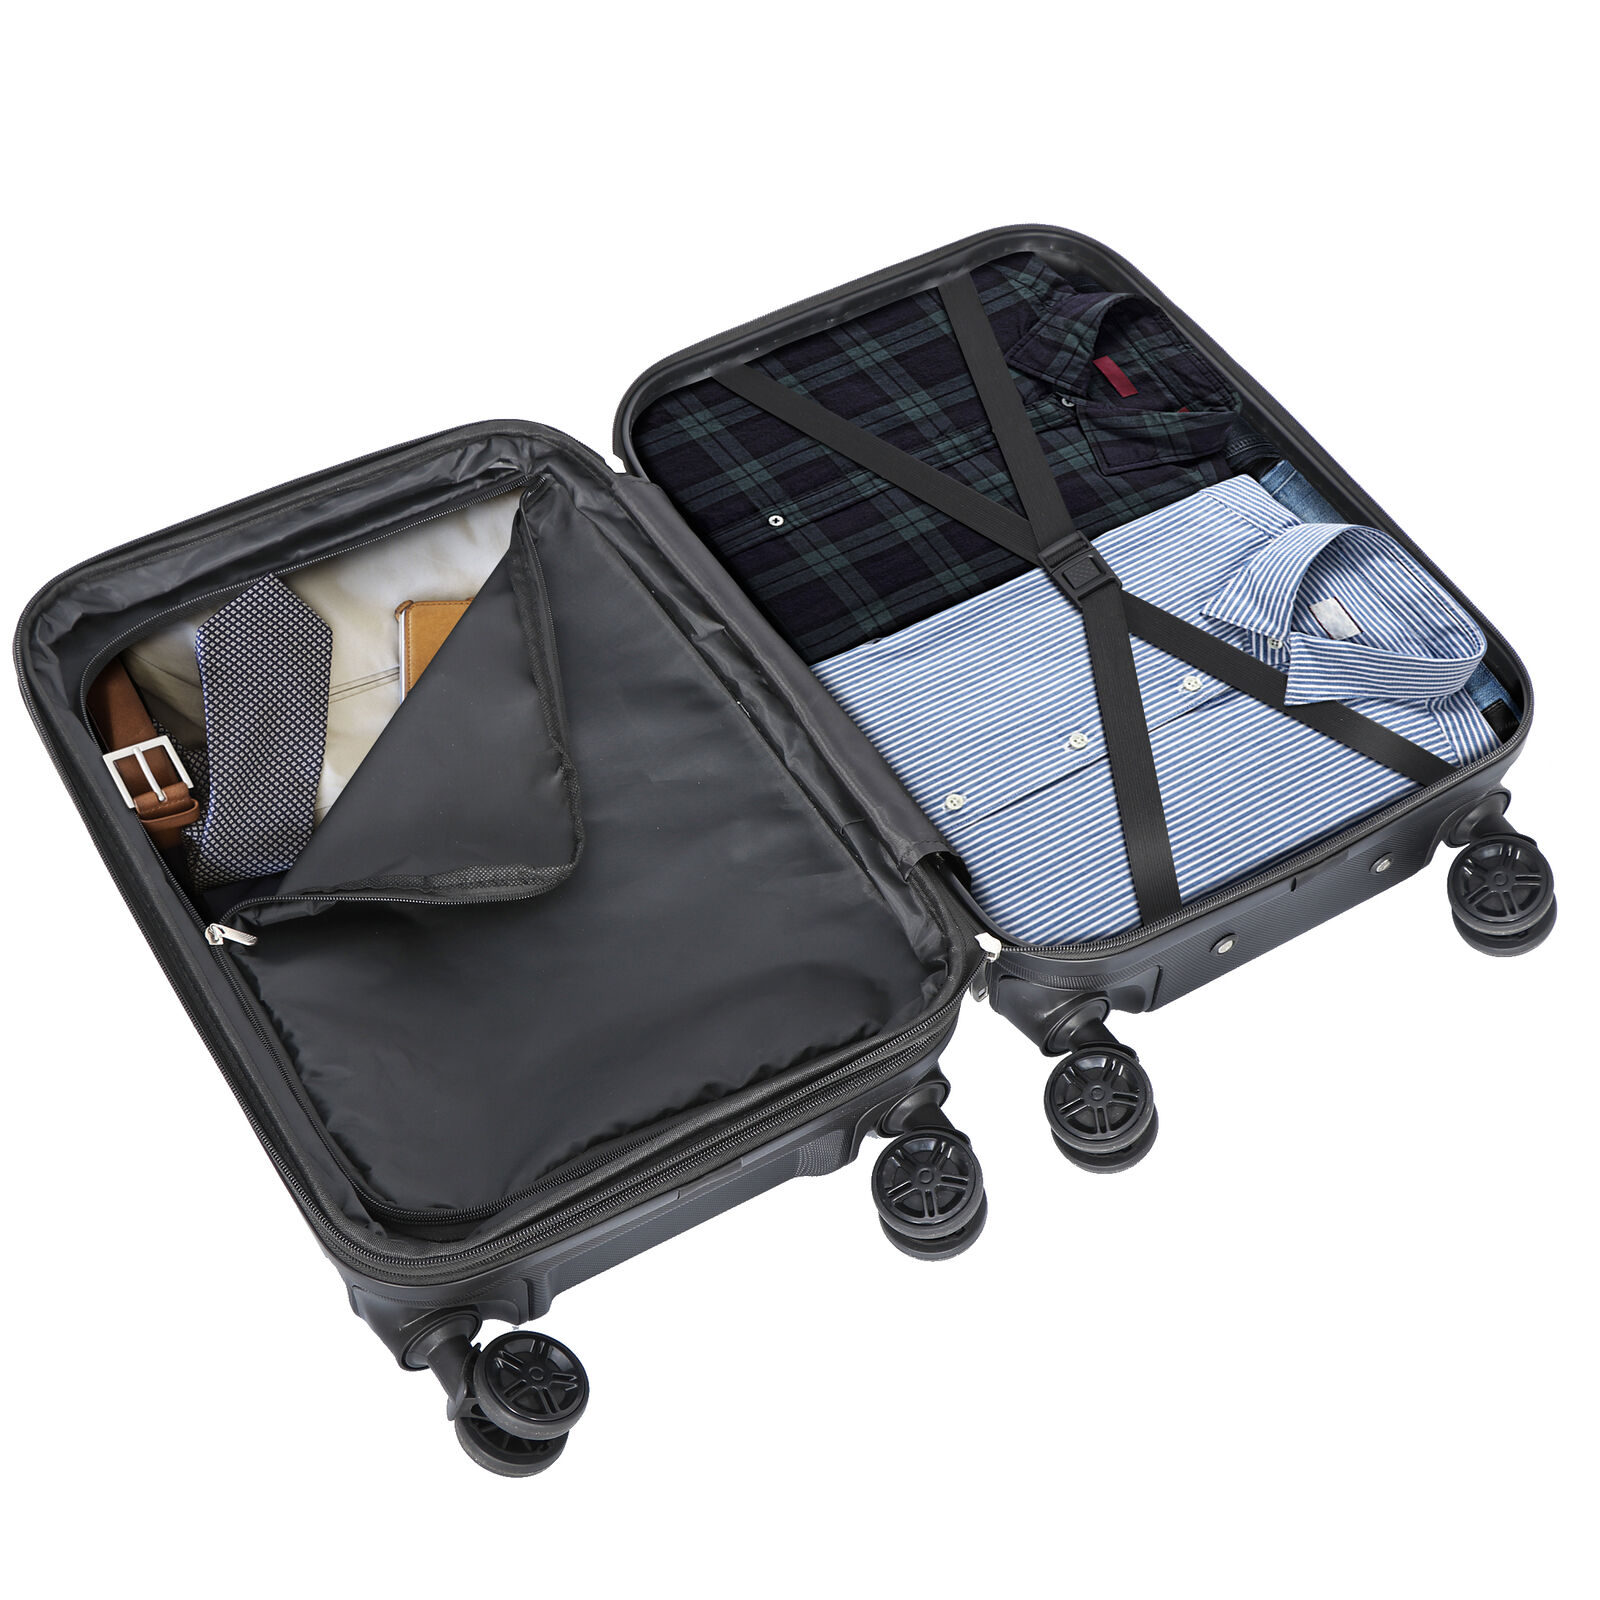 Segawe 22" Hardside Expandable Carry-On Suitcase Luggage with Spinner Wheels Vacation